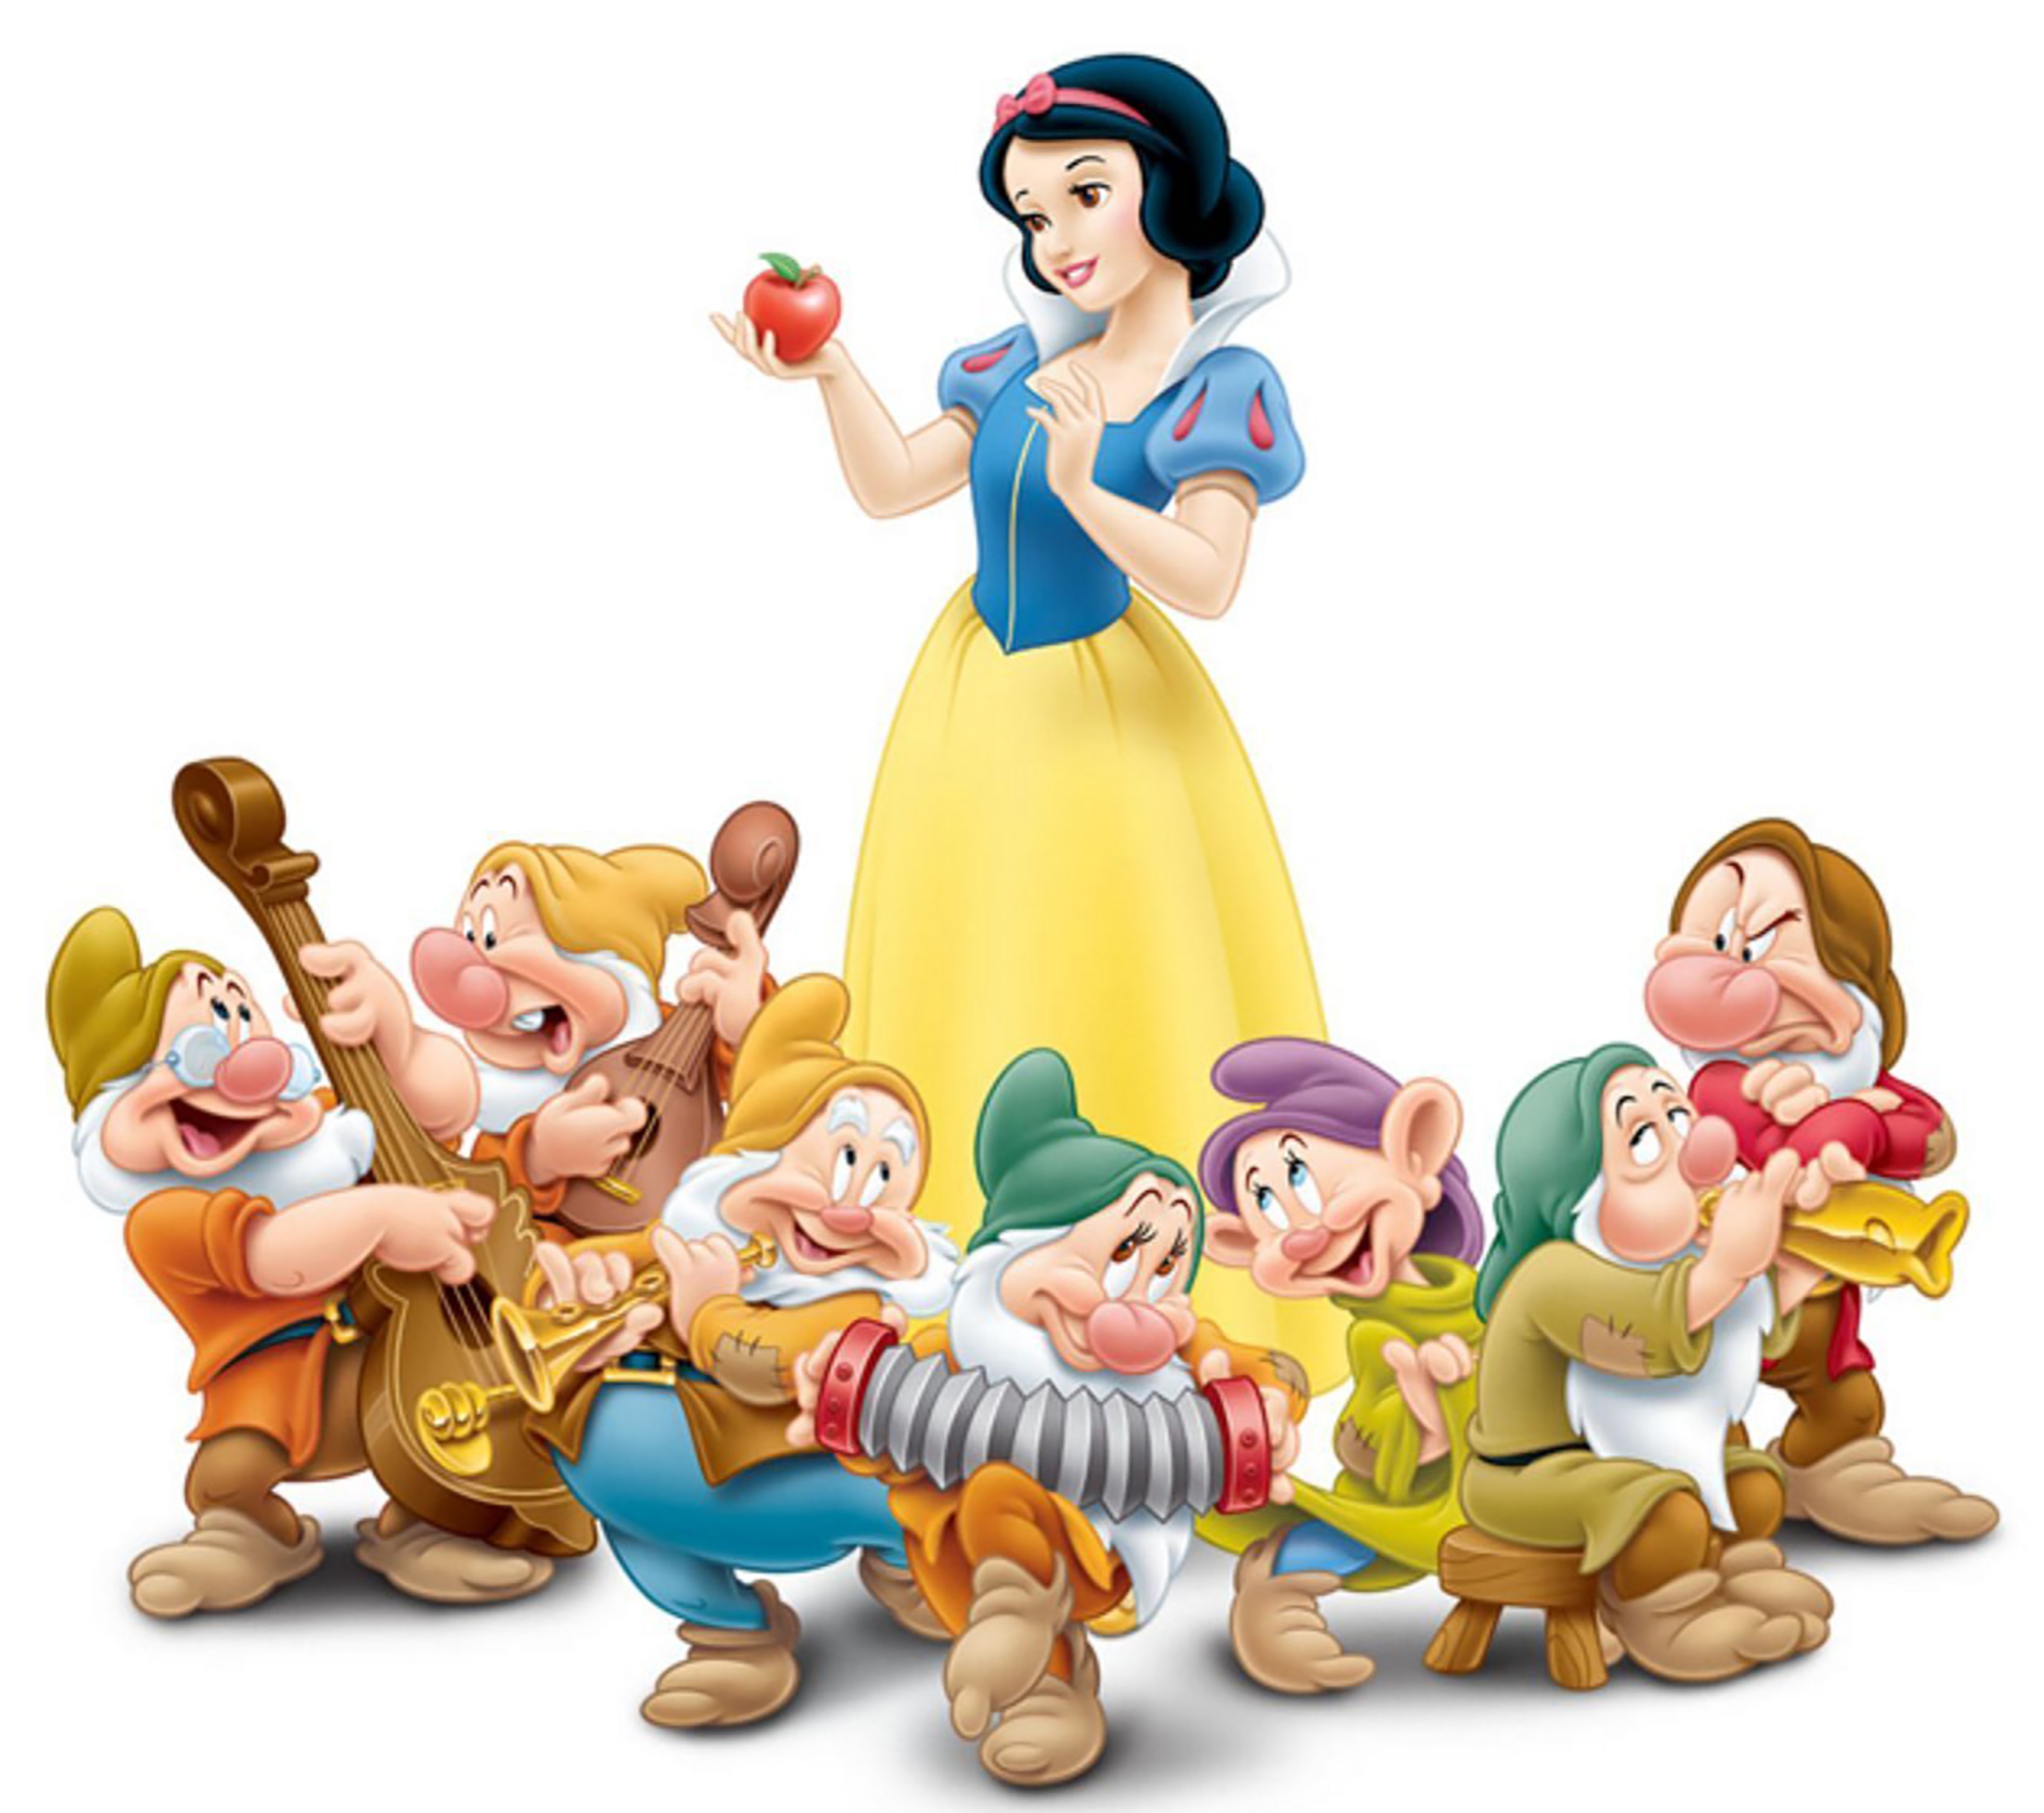 SNOW WHITE AND THE SEVEN DWARFS IRON ON TRANSFER #2 